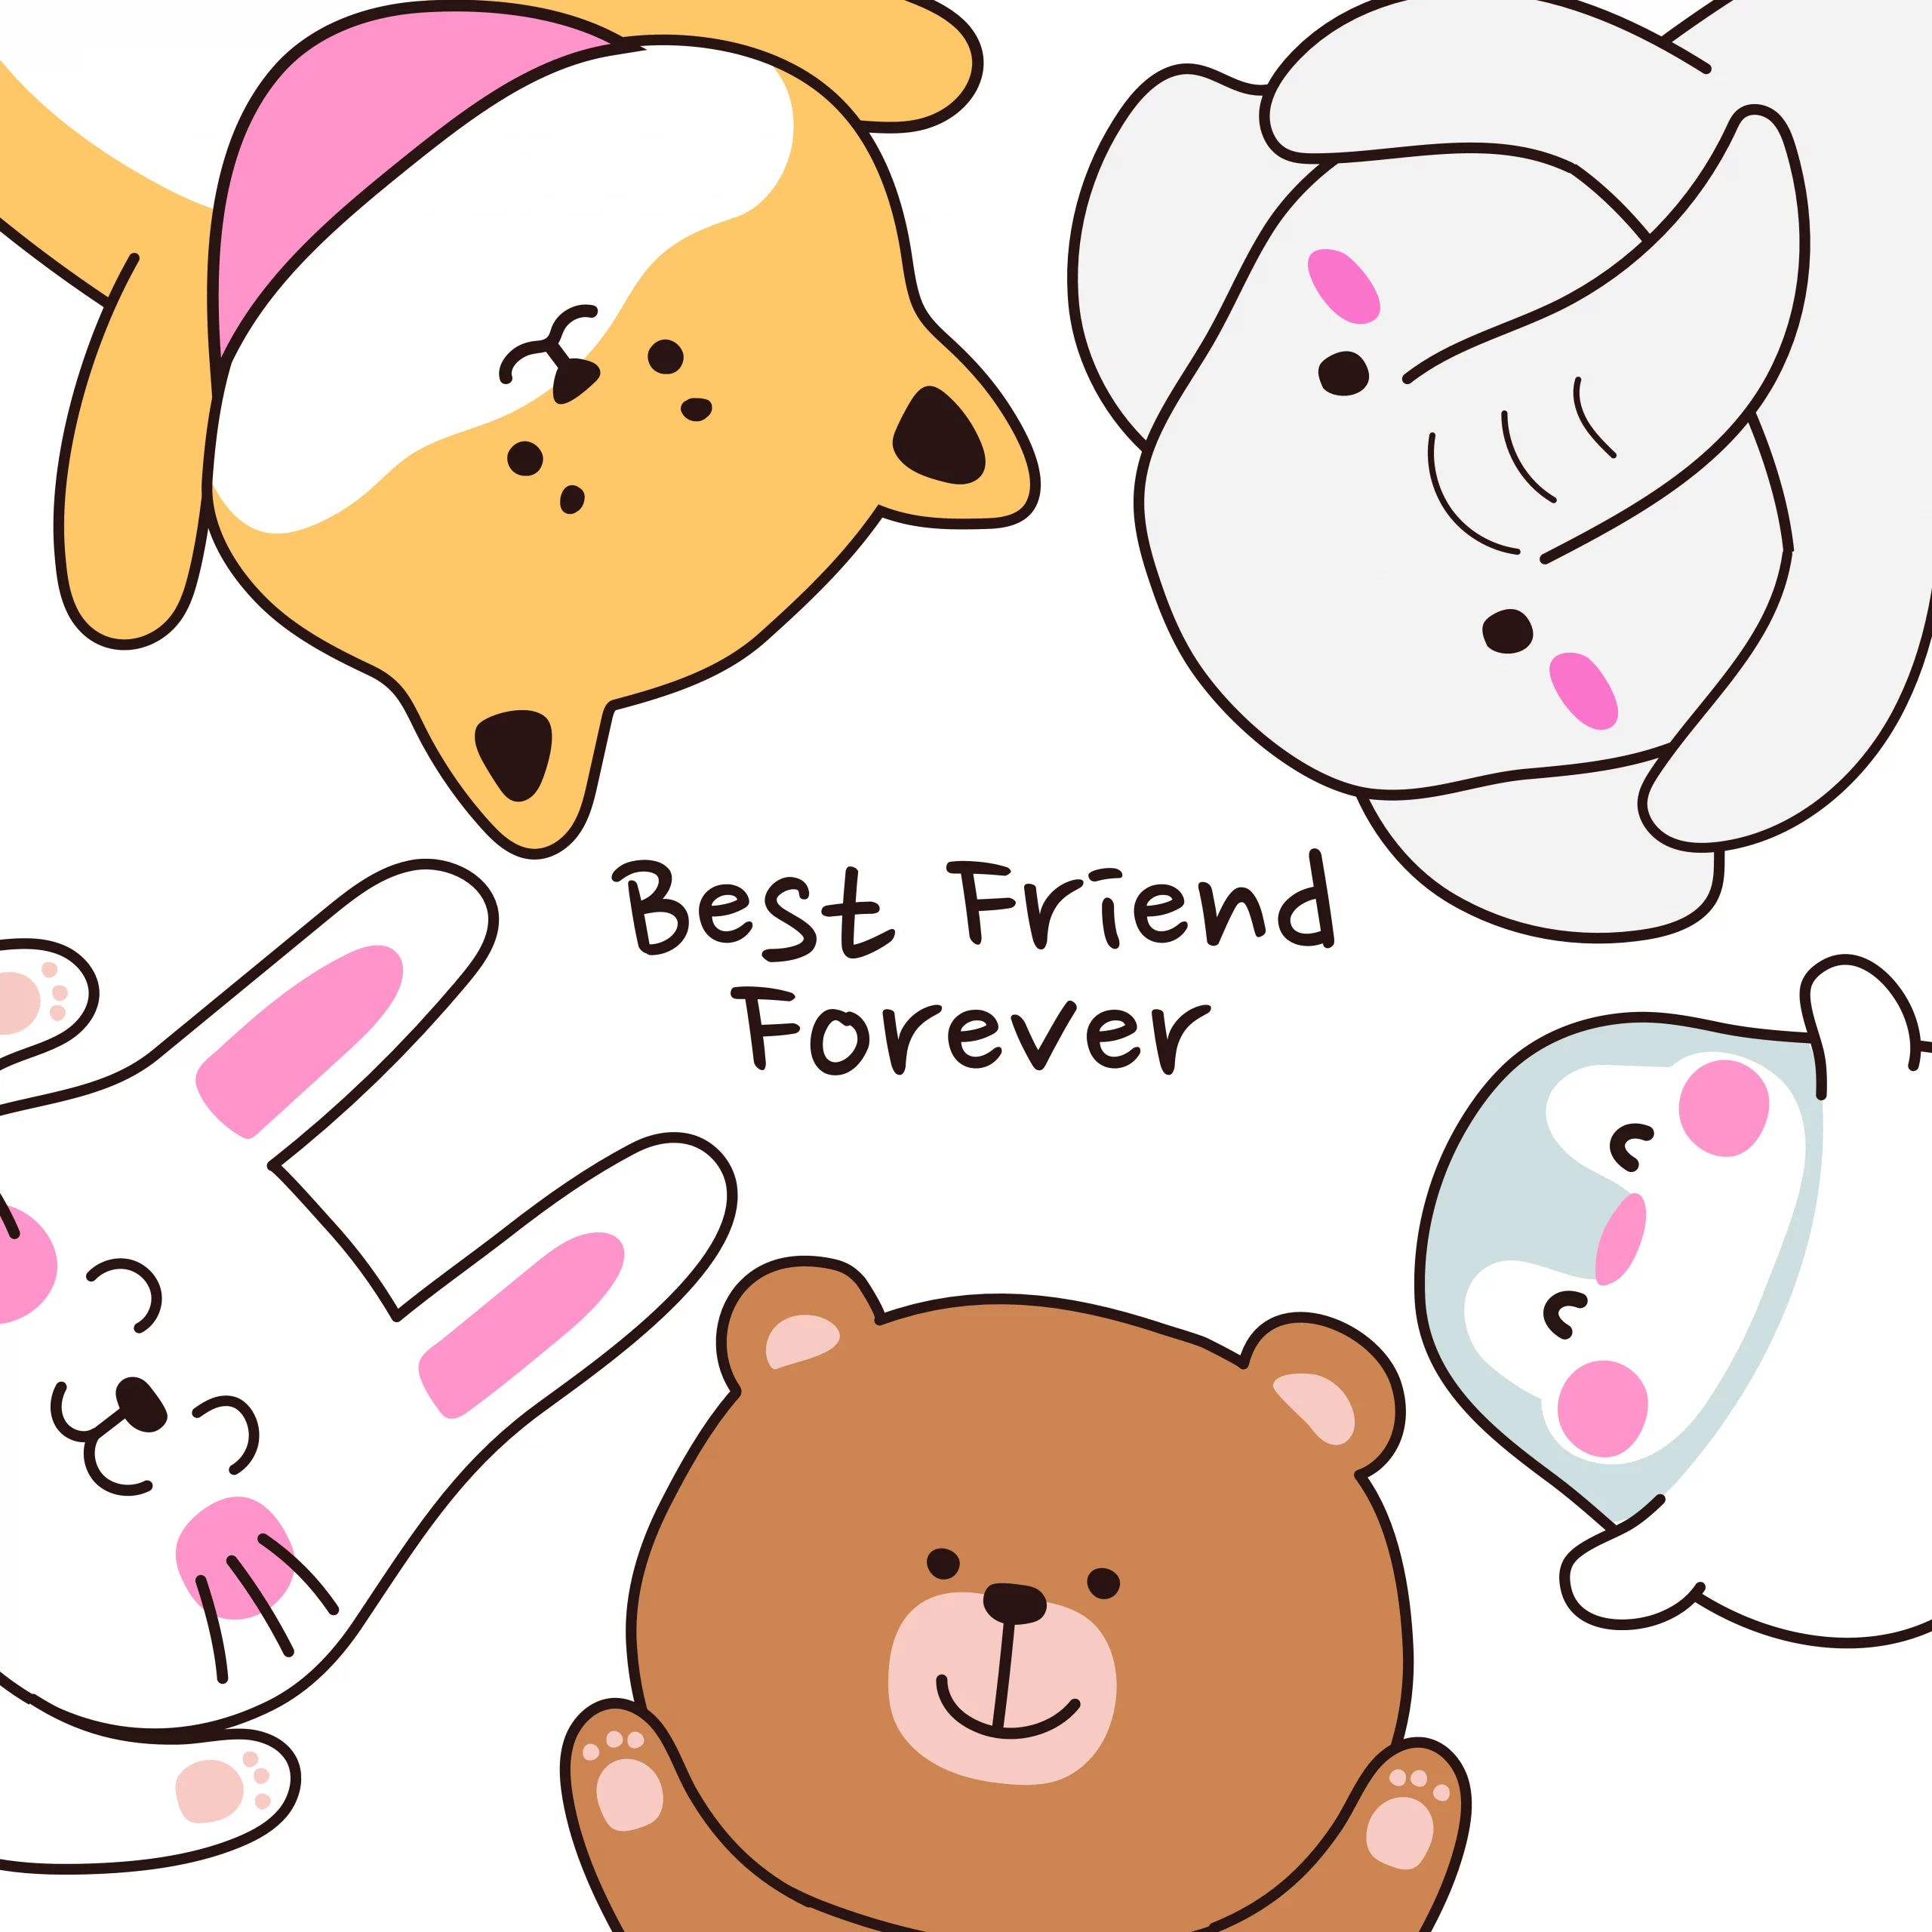 Kawaii Stuffed Animals is your best friend forever